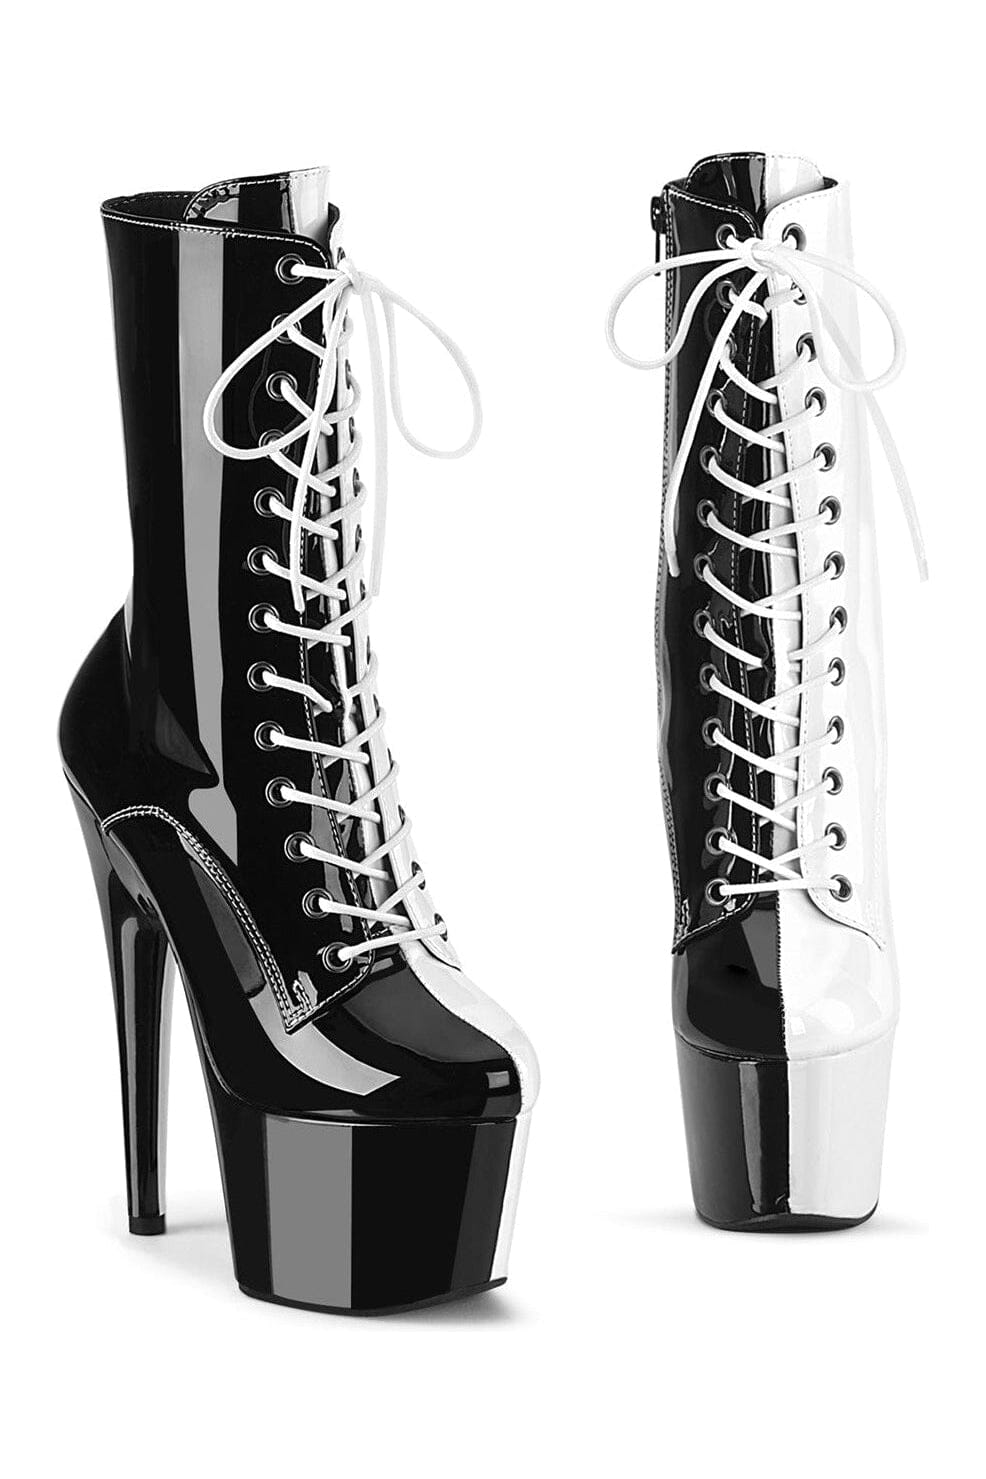 ADORE-1040TT Black Patent Ankle Boot-Ankle Boots-Pleaser-Black-10-Patent-SEXYSHOES.COM